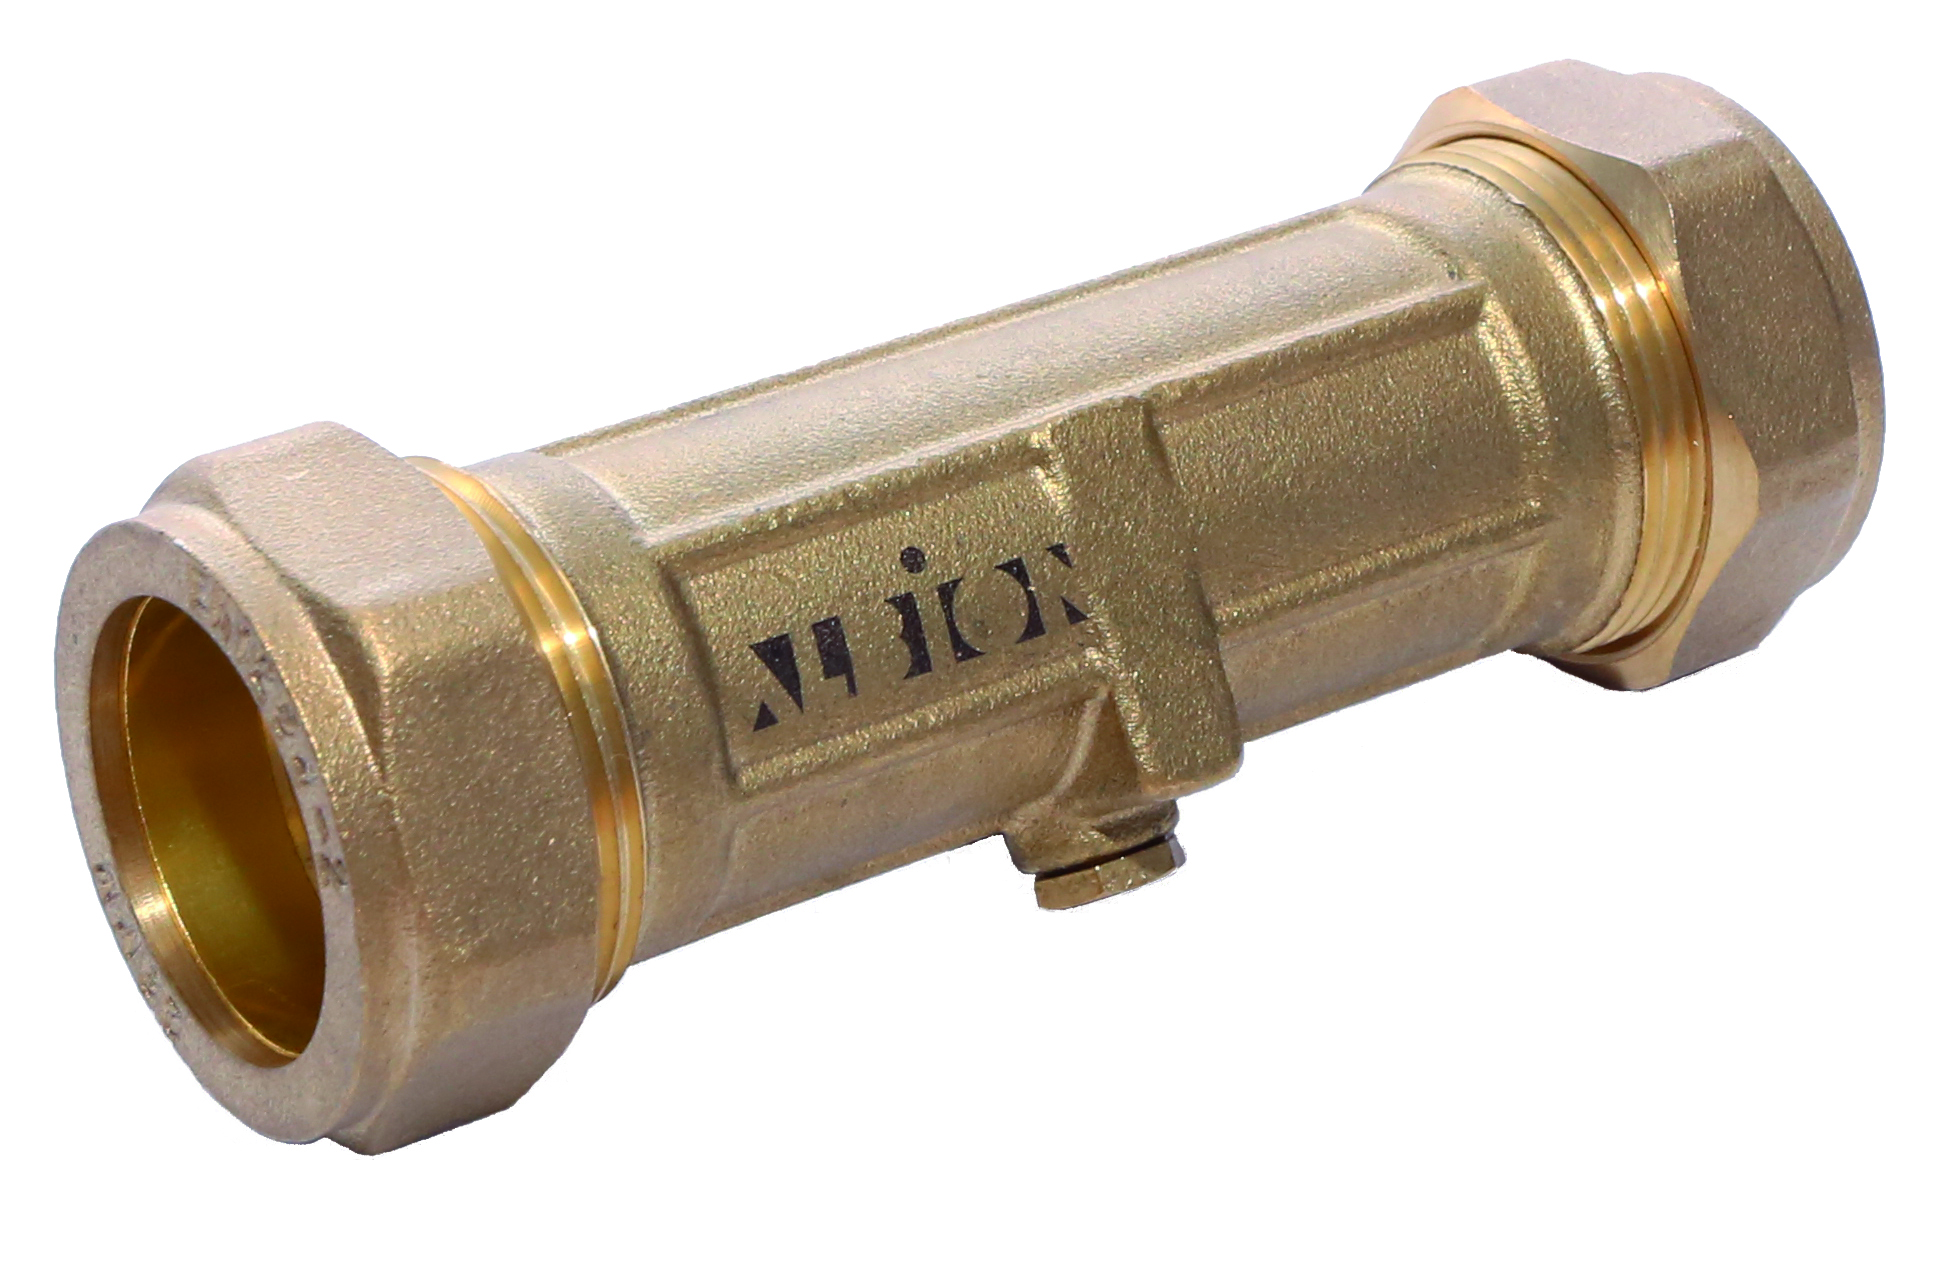 Albion has added new WRAS-approved double check valves to its portfolio.